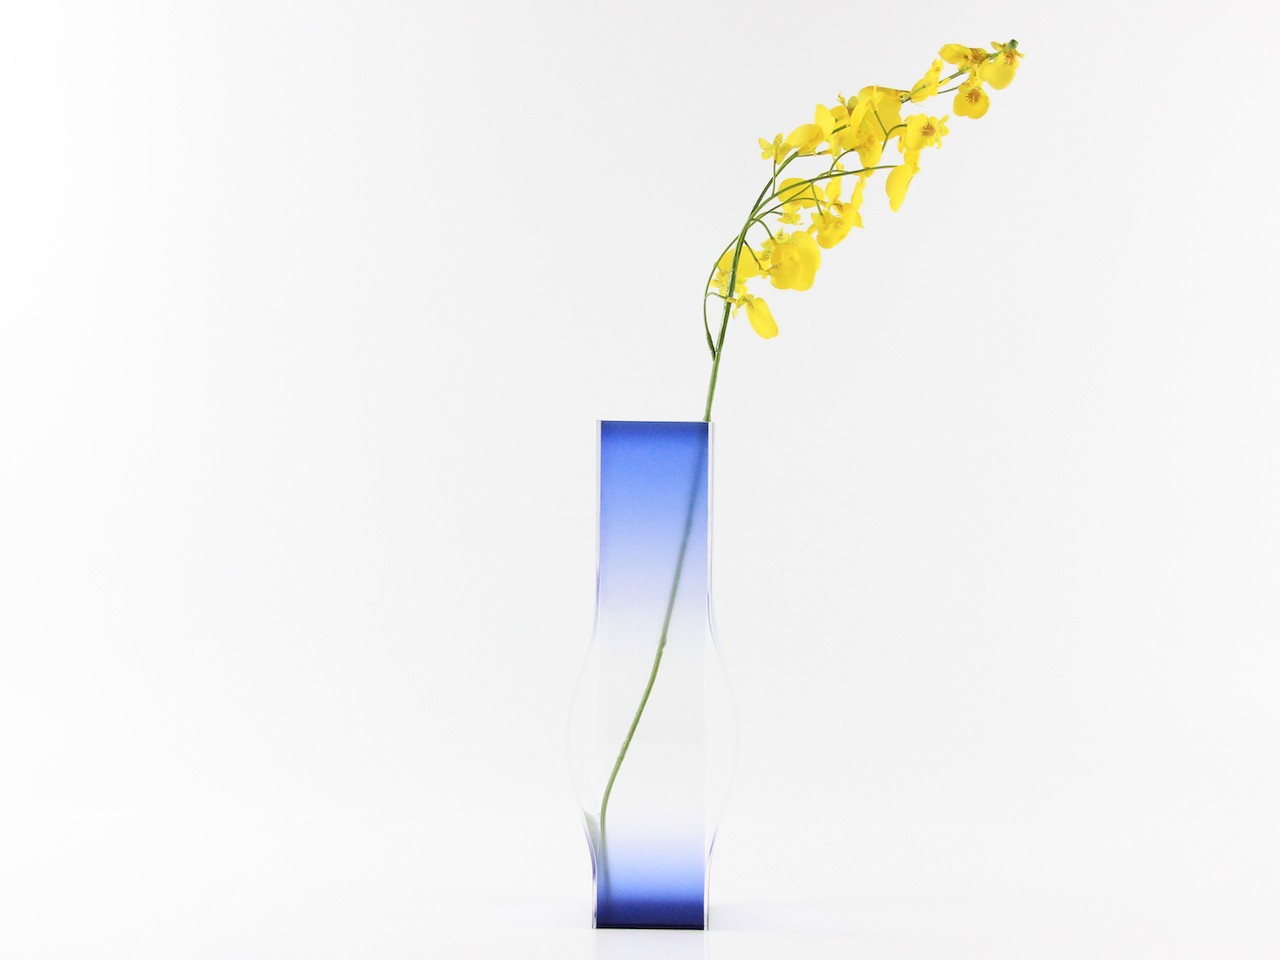 Transparent vases create an optical illusion of colors stretching into nothingness